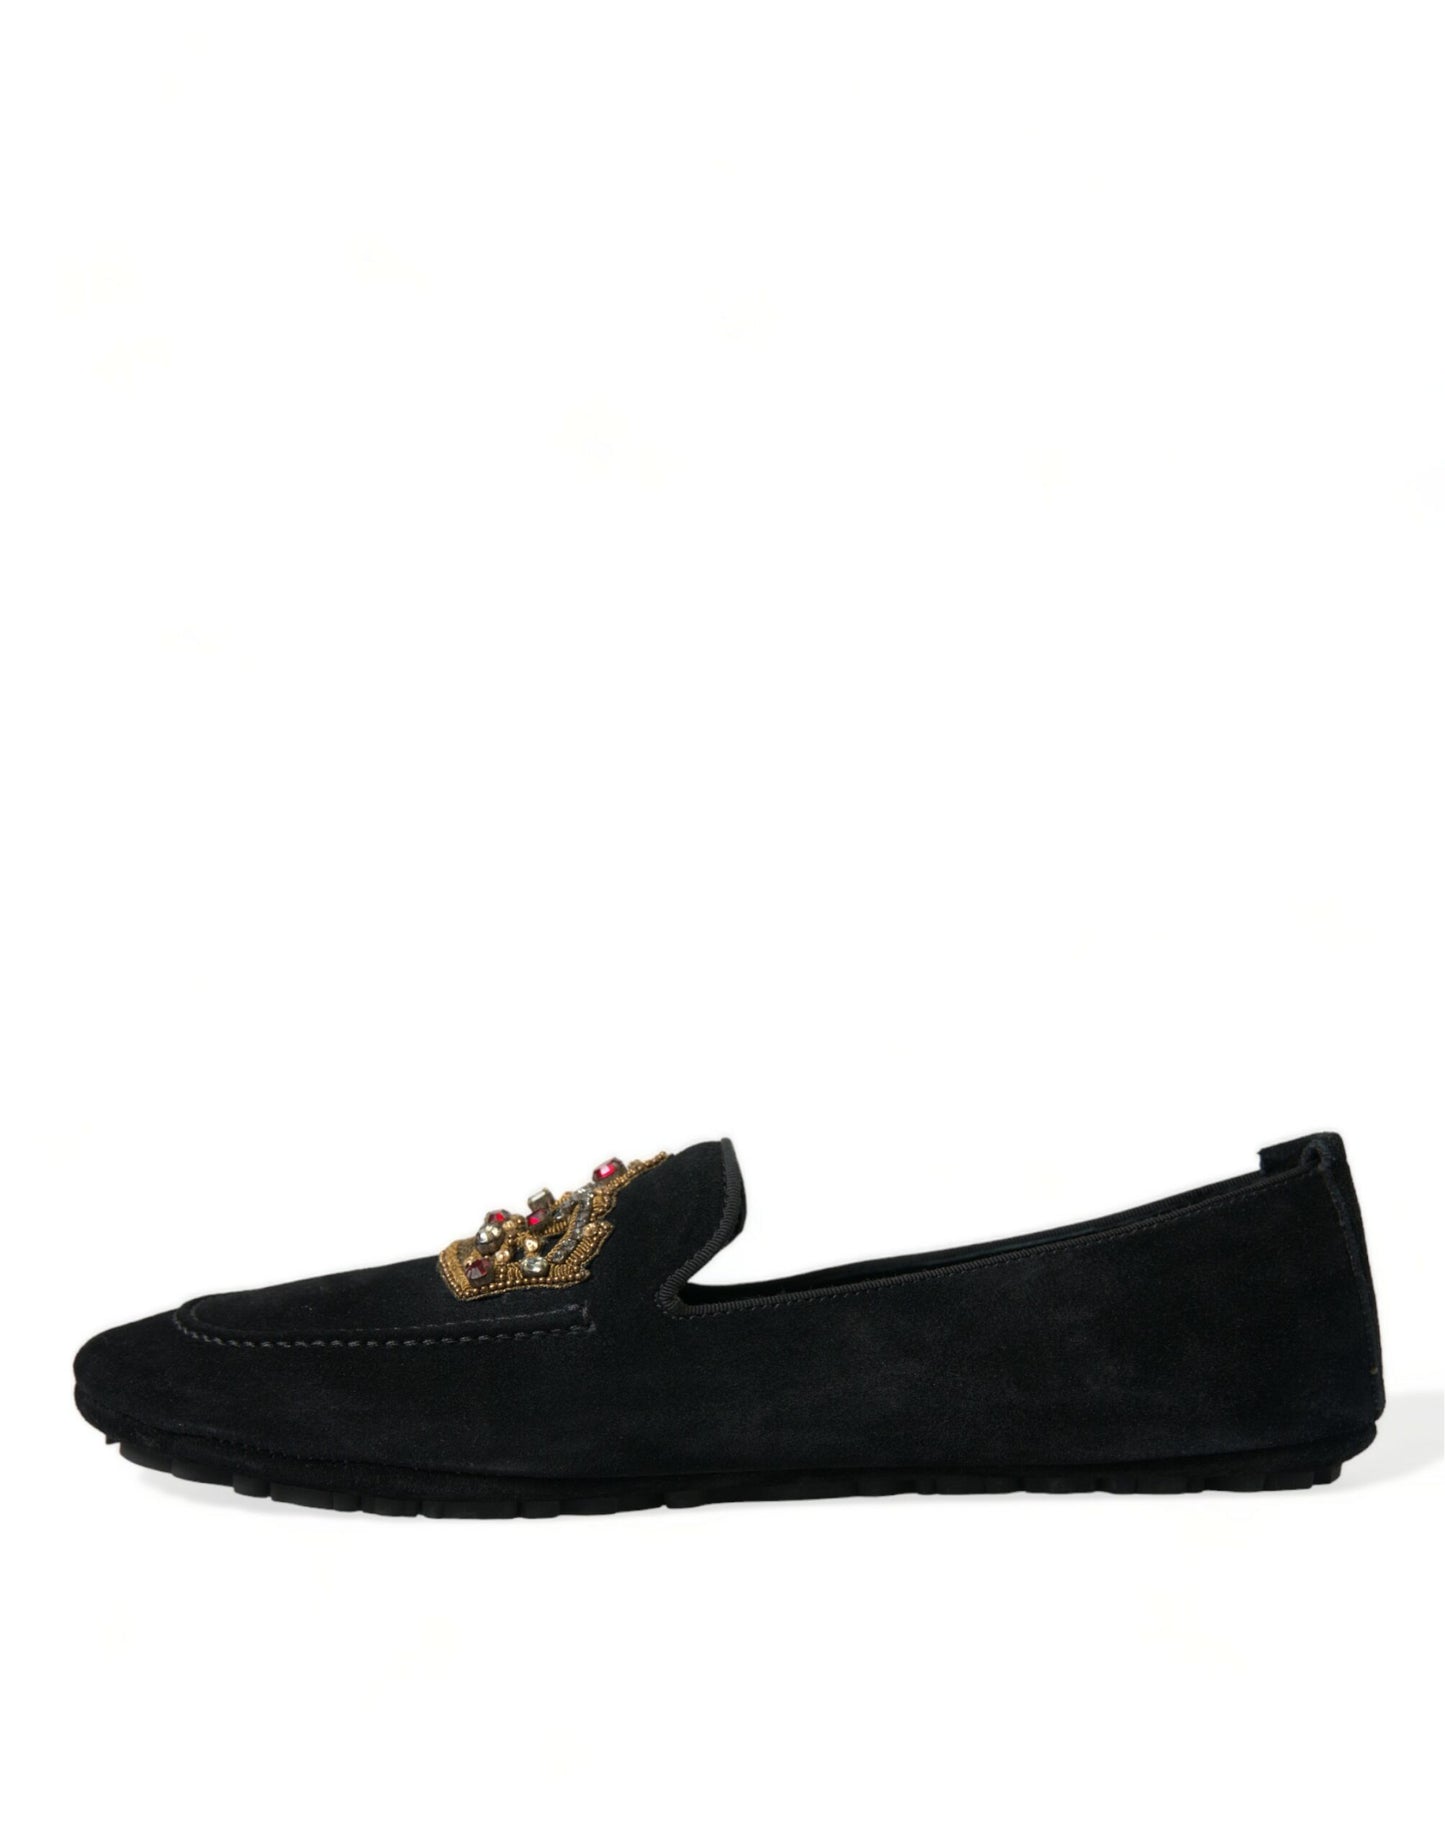 Dolce & Gabbana Black Leather Crystal Crown Loafers Shoes - DEA STILOSA MILANO